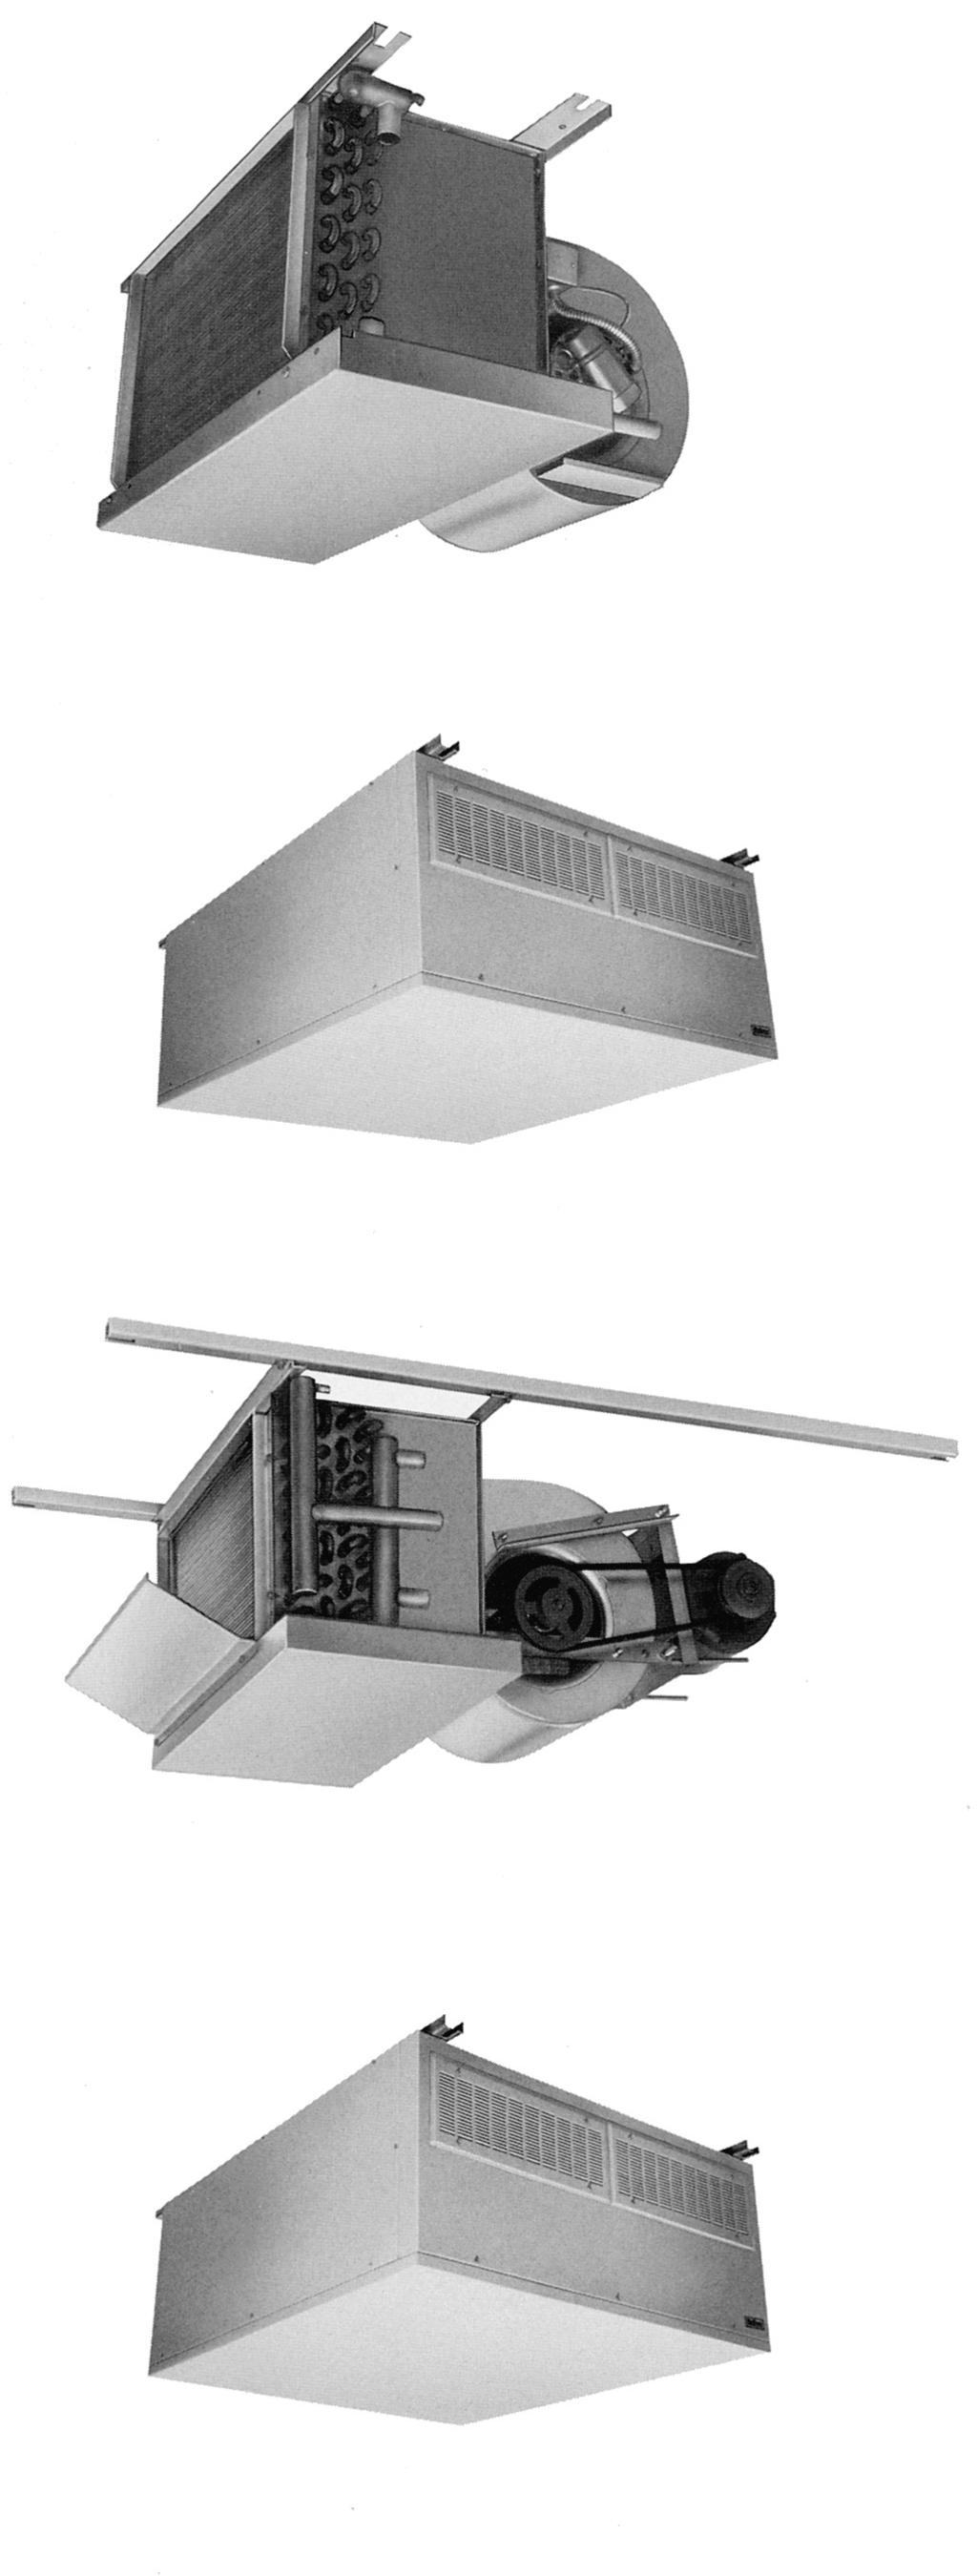 McQuay Large Capacity Fan Coil Units Page 2 / Catalog 735 Direct drive hideaway unit The direct drive hideaway unit is designed for installation in a fully concealed ceiling location.